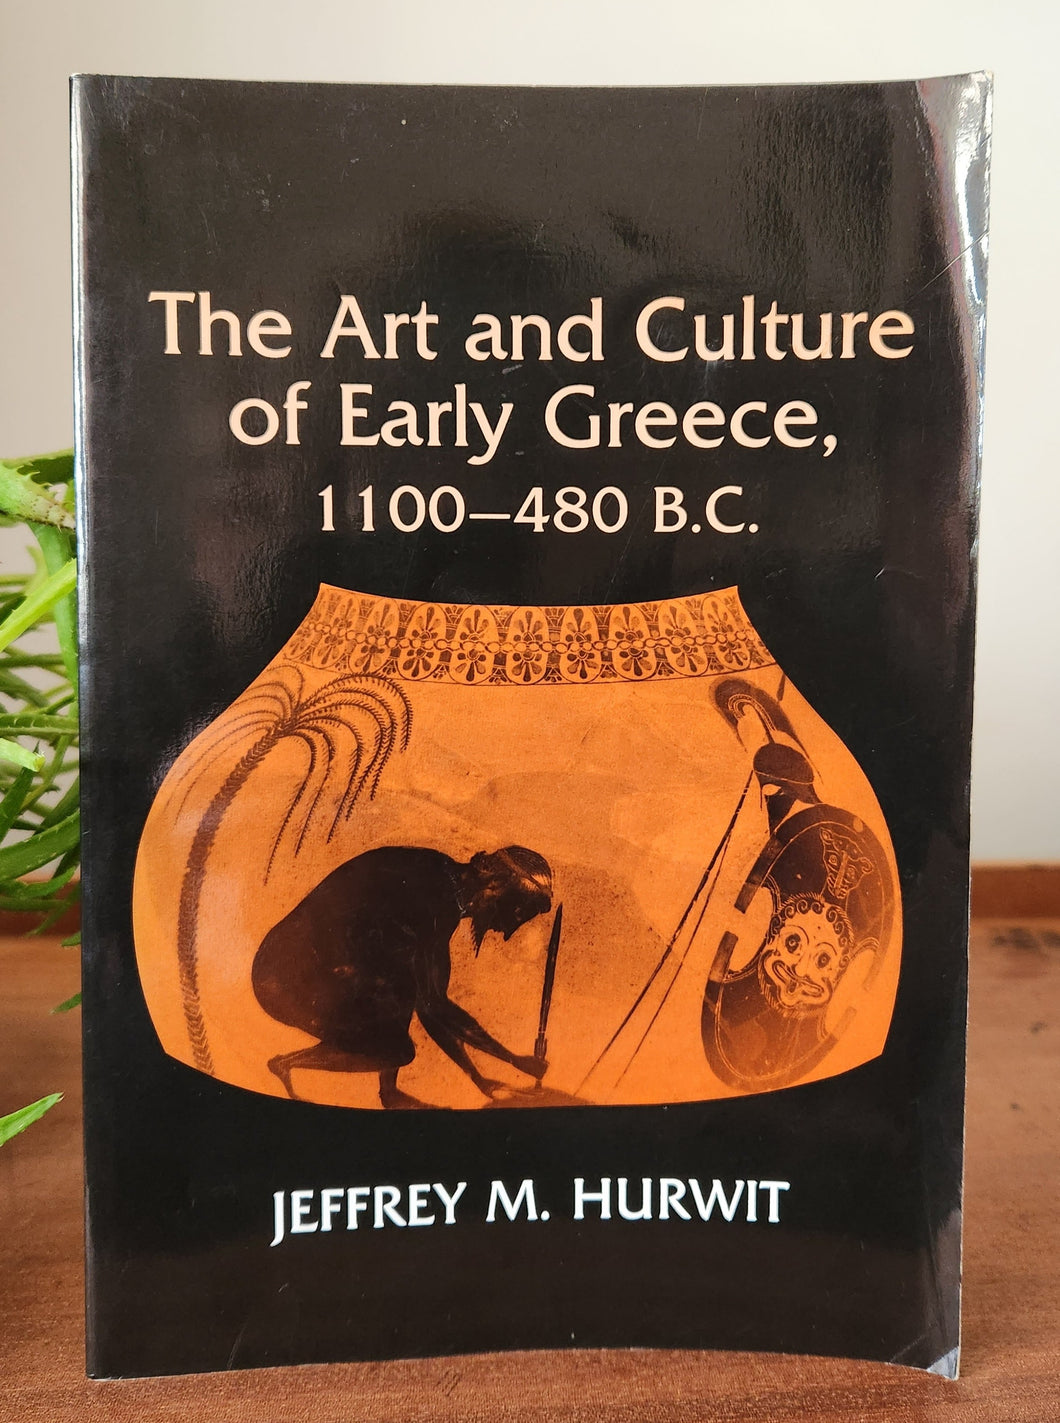 The Art and Culture of Early Greece 1100-480 B.C. by Jeffrey M. Hurwit